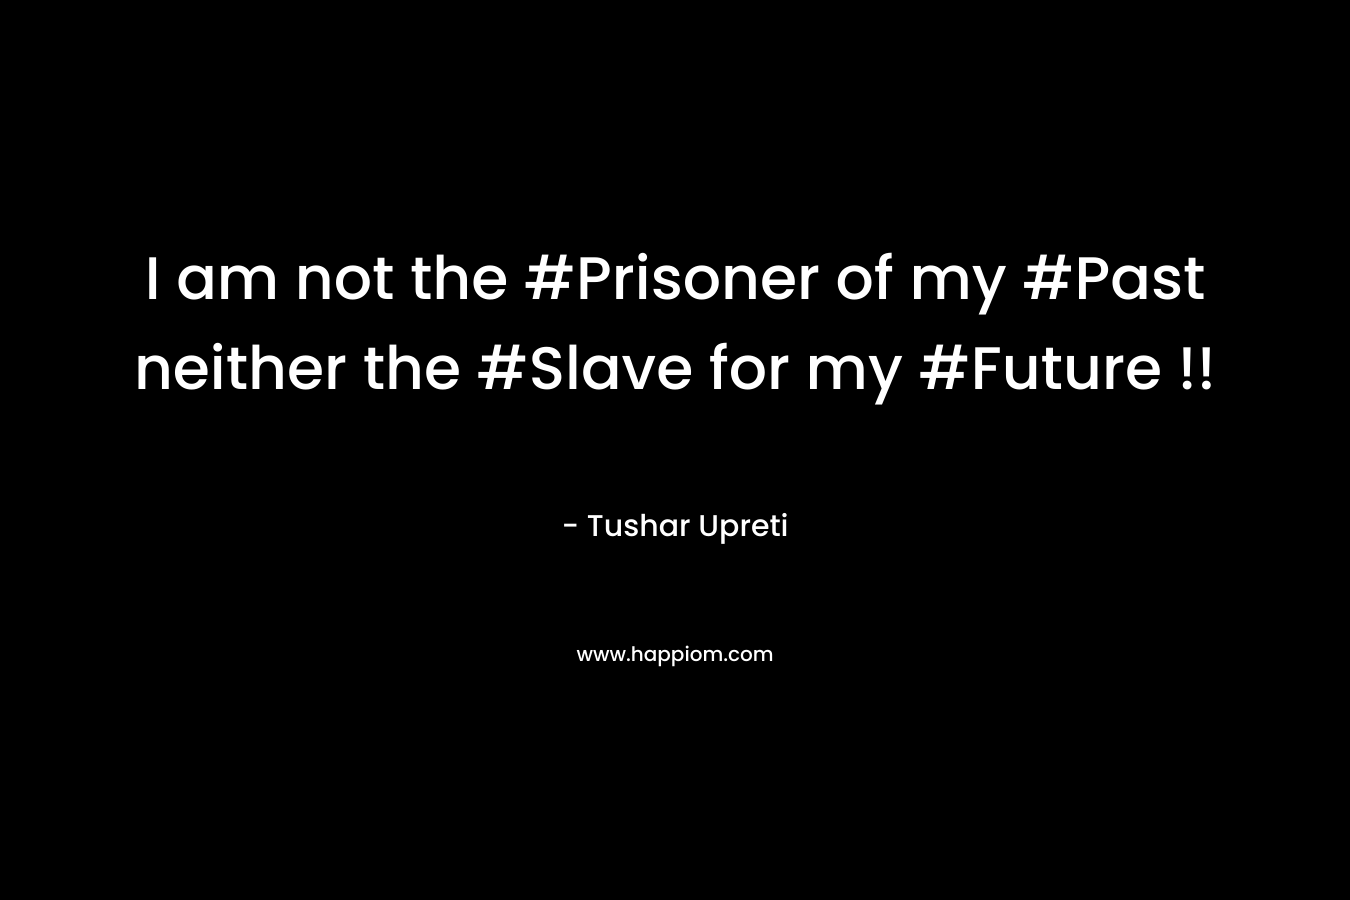 I am not the #Prisoner of my #Past neither the #Slave for my #Future !!